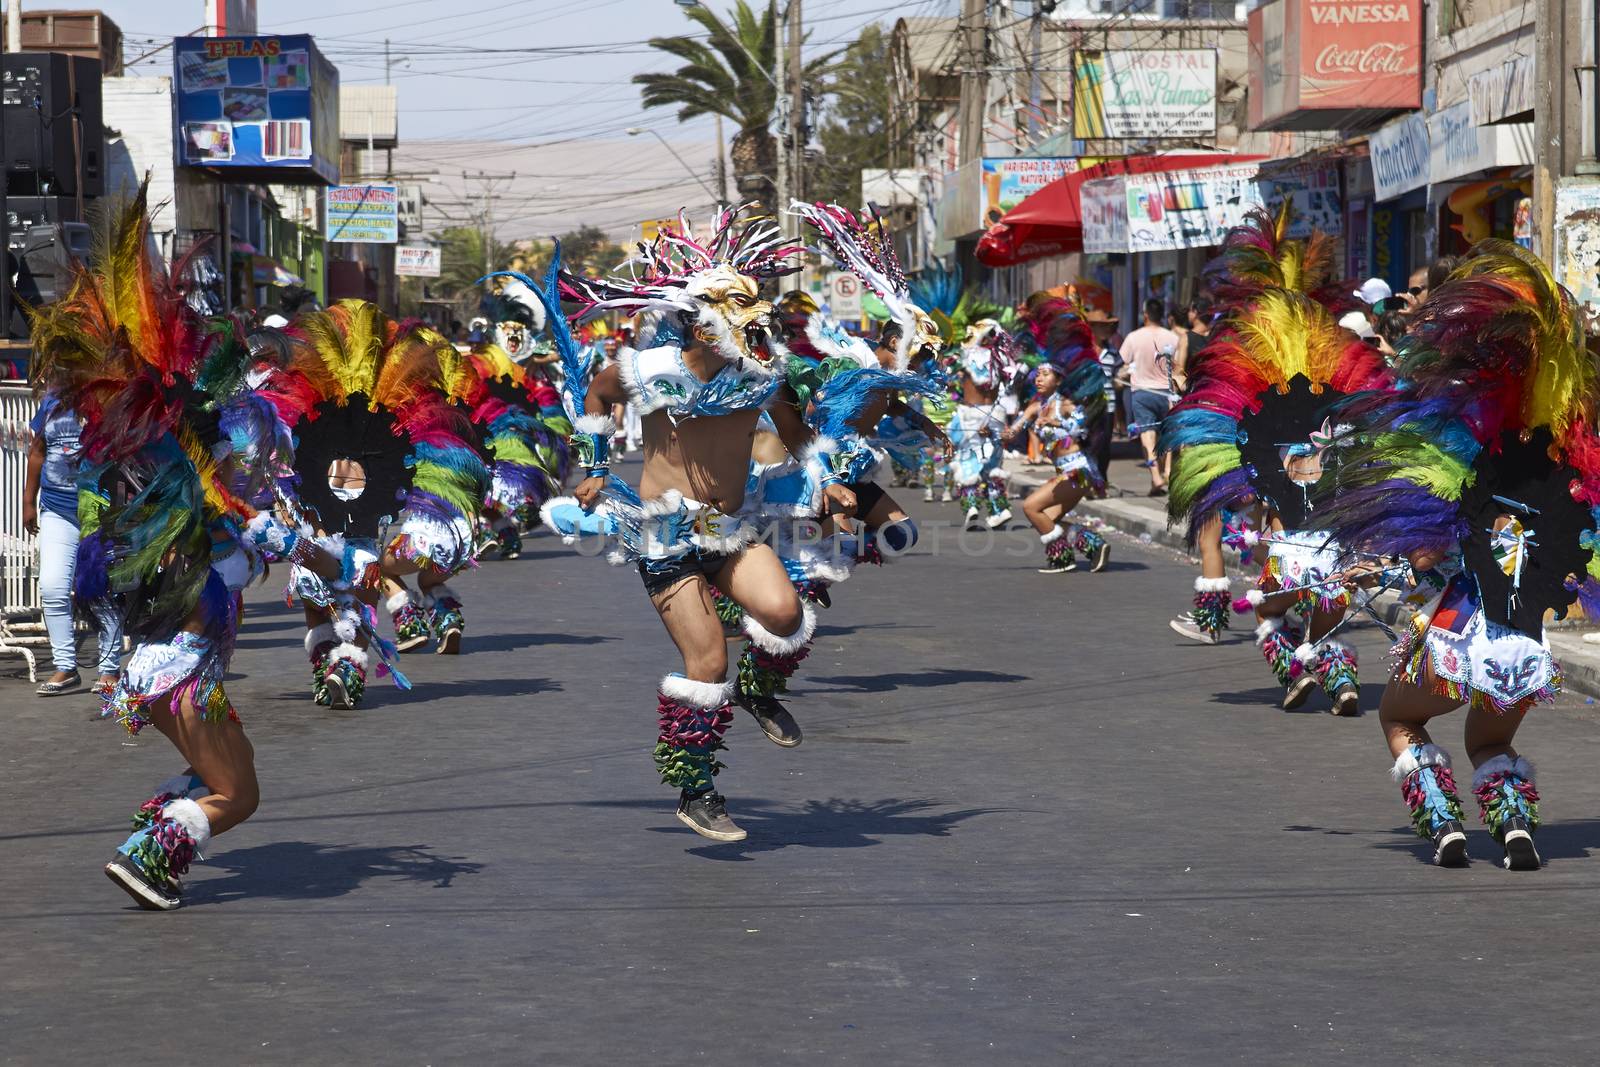 Tobas dancers in traditional Andean costumes performing at the annual Carnaval Andino con la Fuerza del Sol in Arica, Chile.